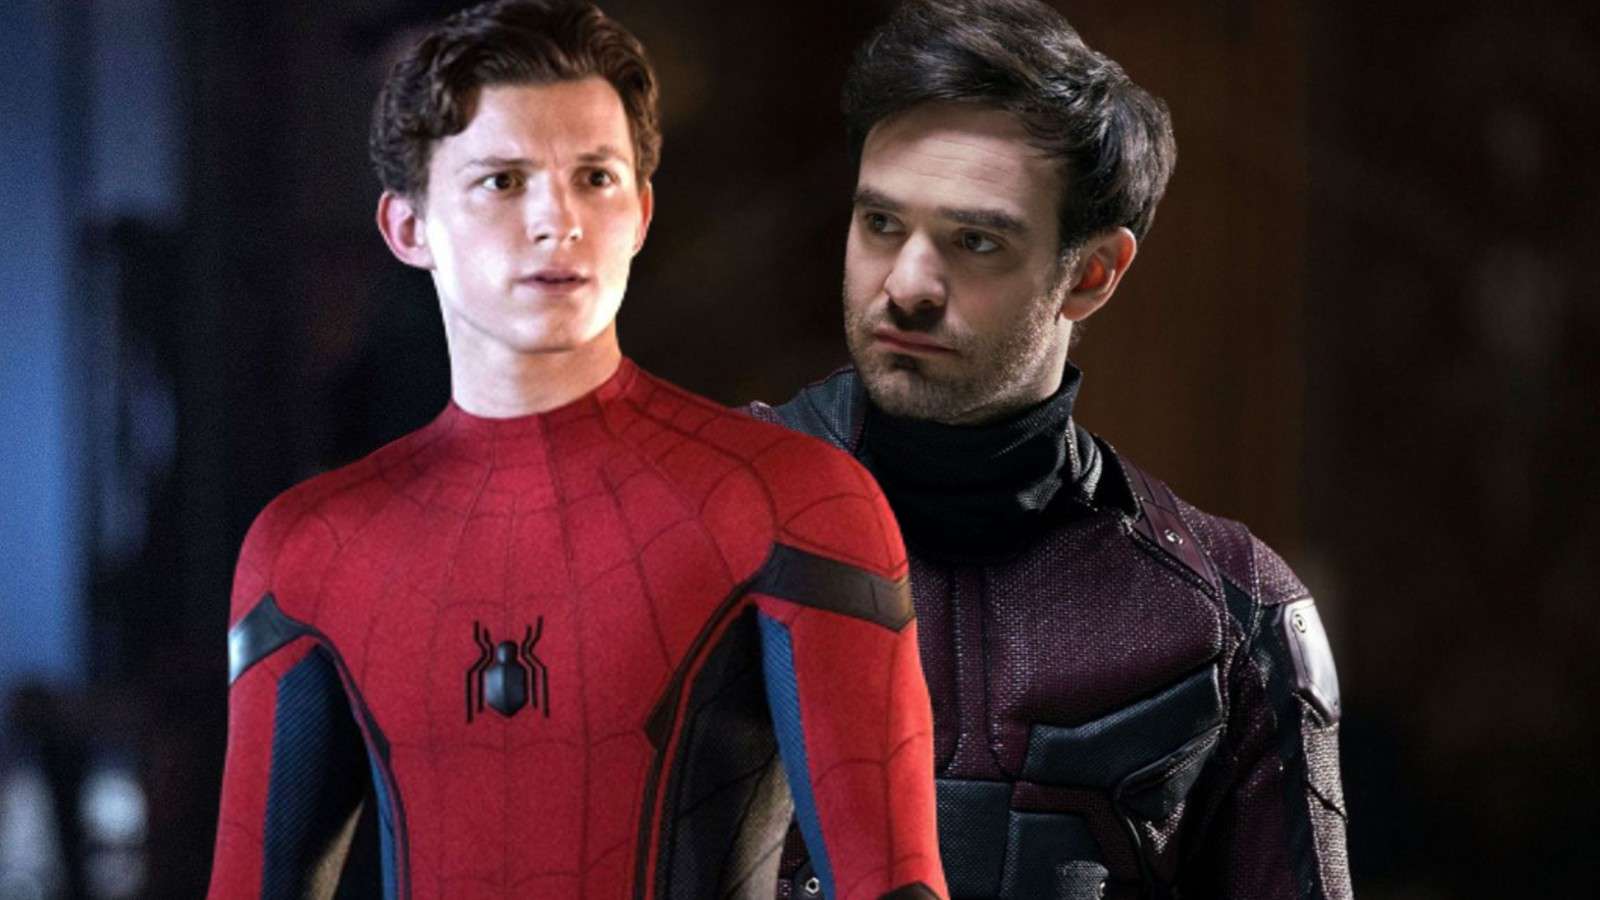 Tom Holland as Spider-Man and Charlie Cox as Daredevil